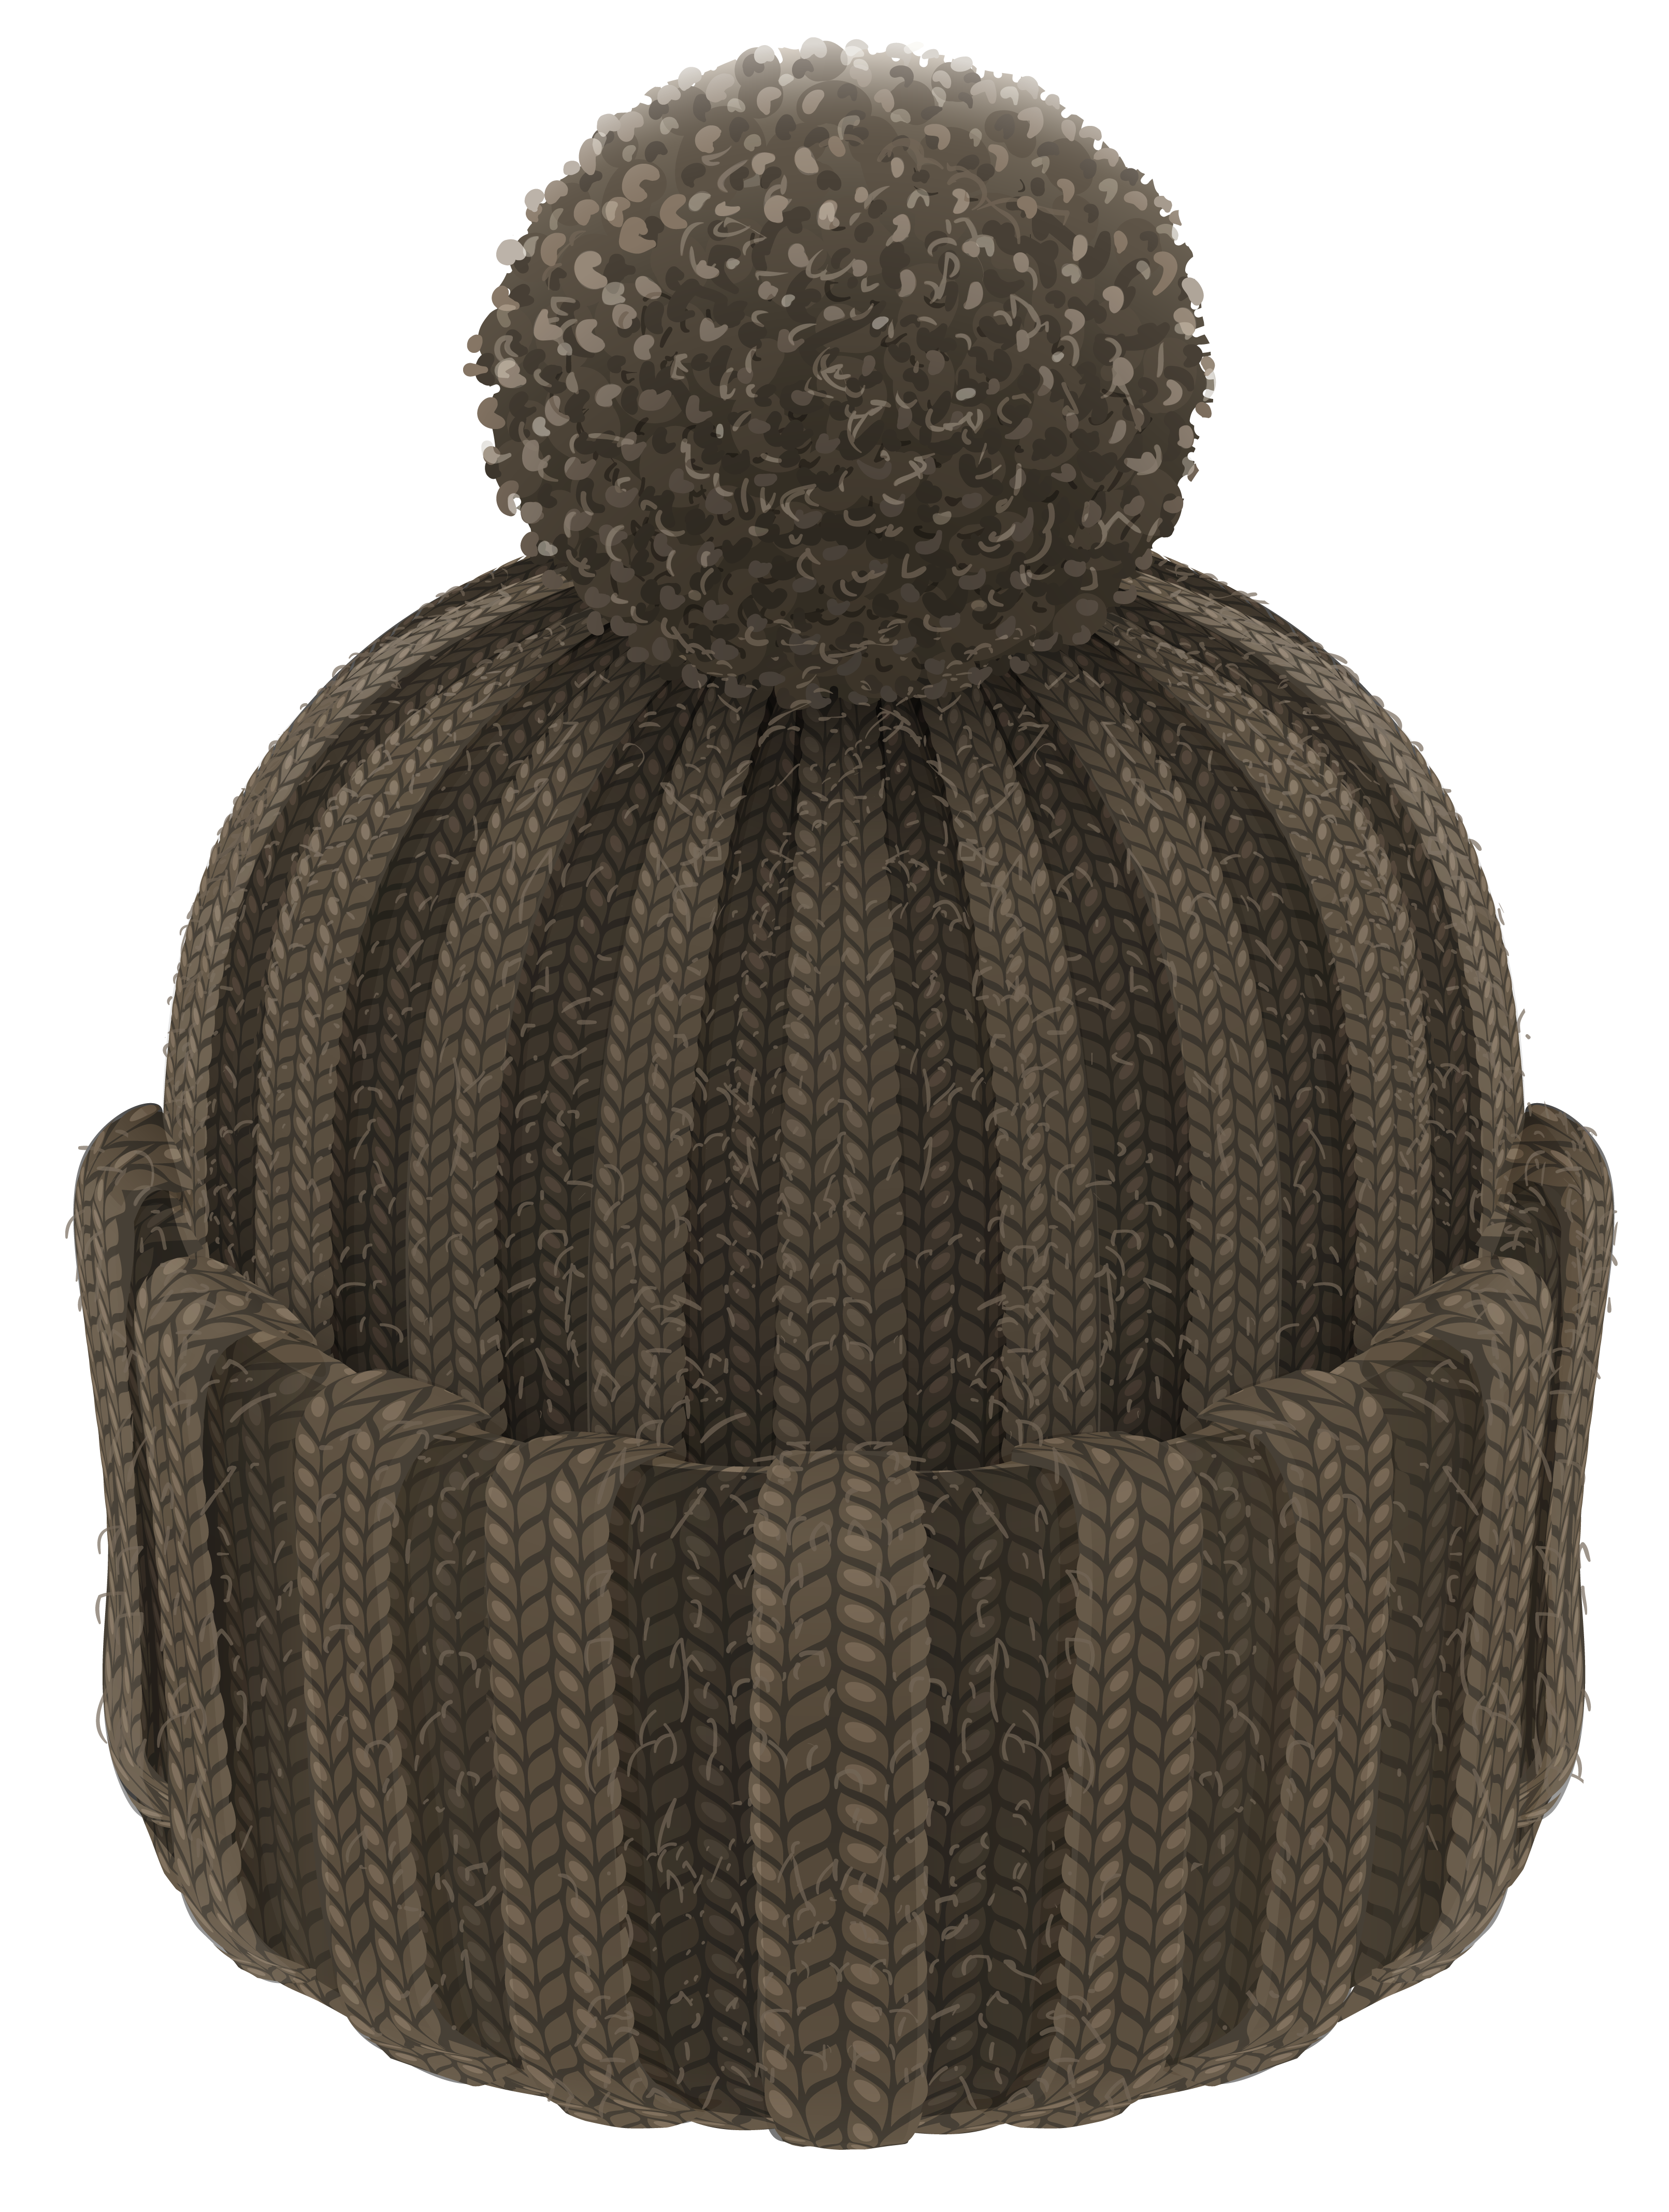 Cap clipart beanie. Pom hat png gallery